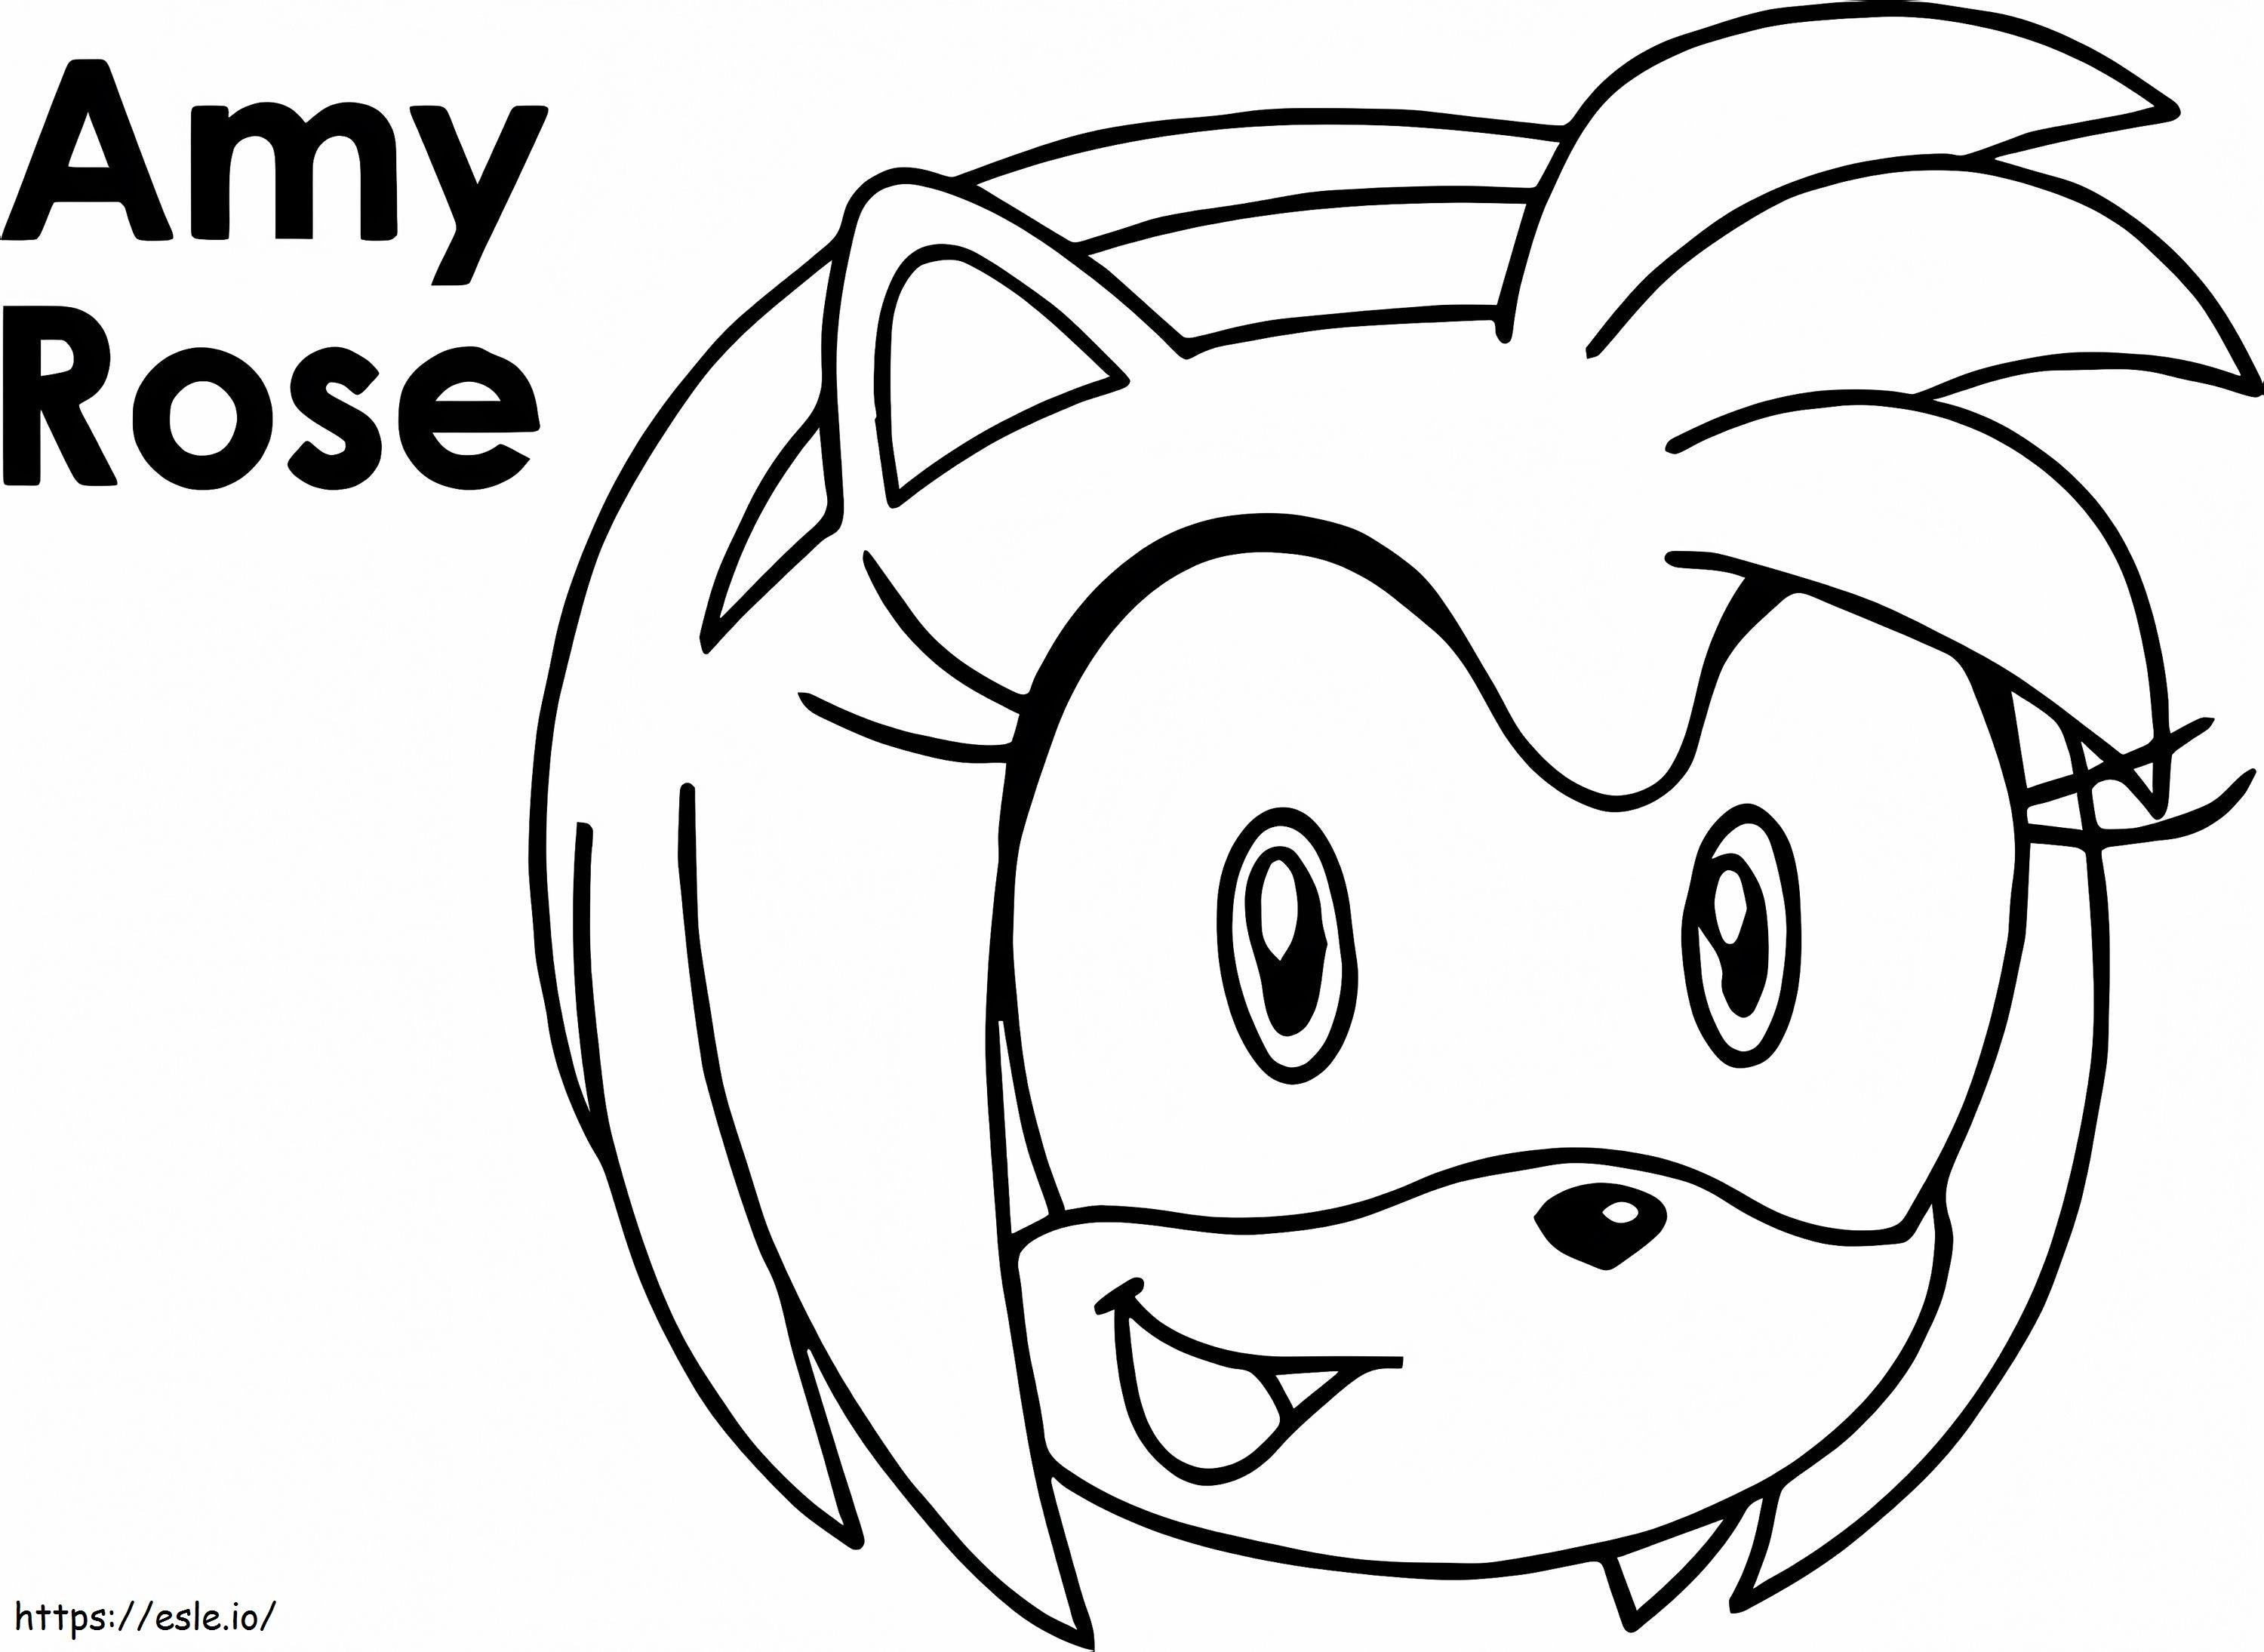 Amy Roses Face coloring page